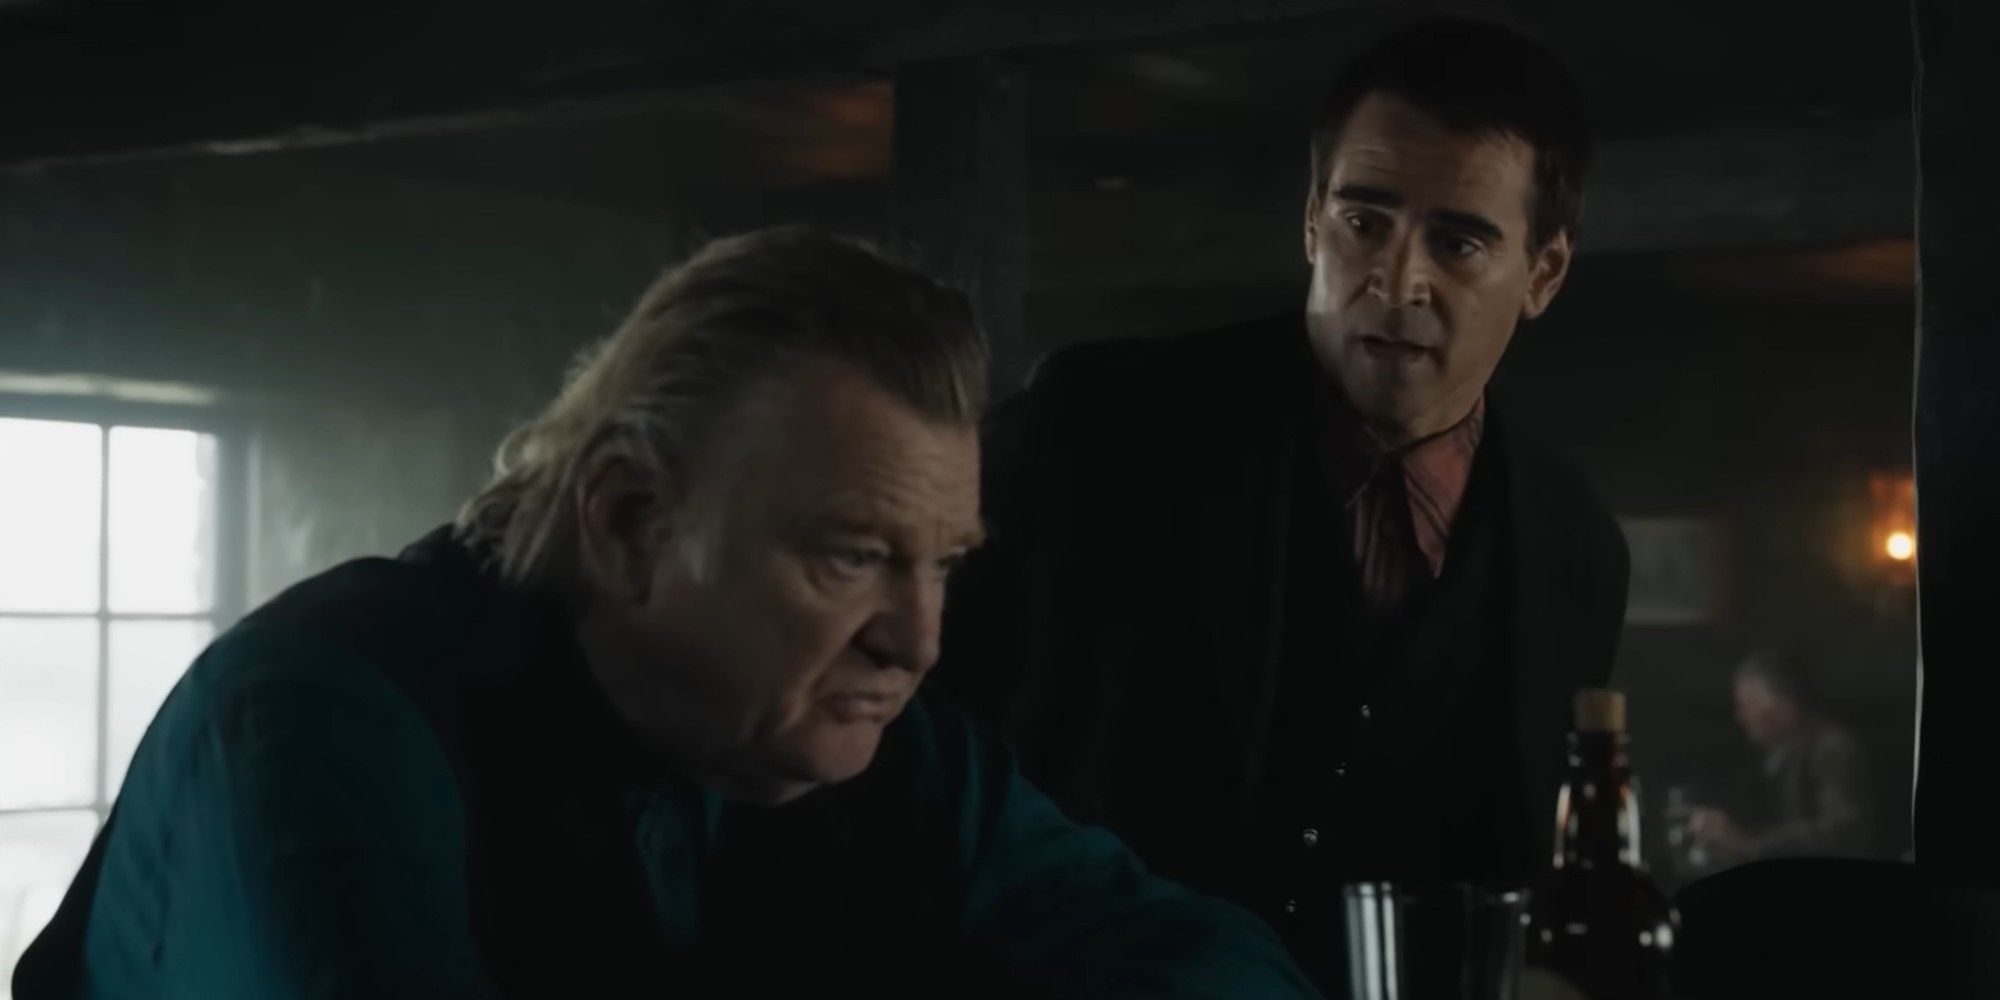 Colin Farrell and Brendan Gleeson In The Banshees of Inisherin